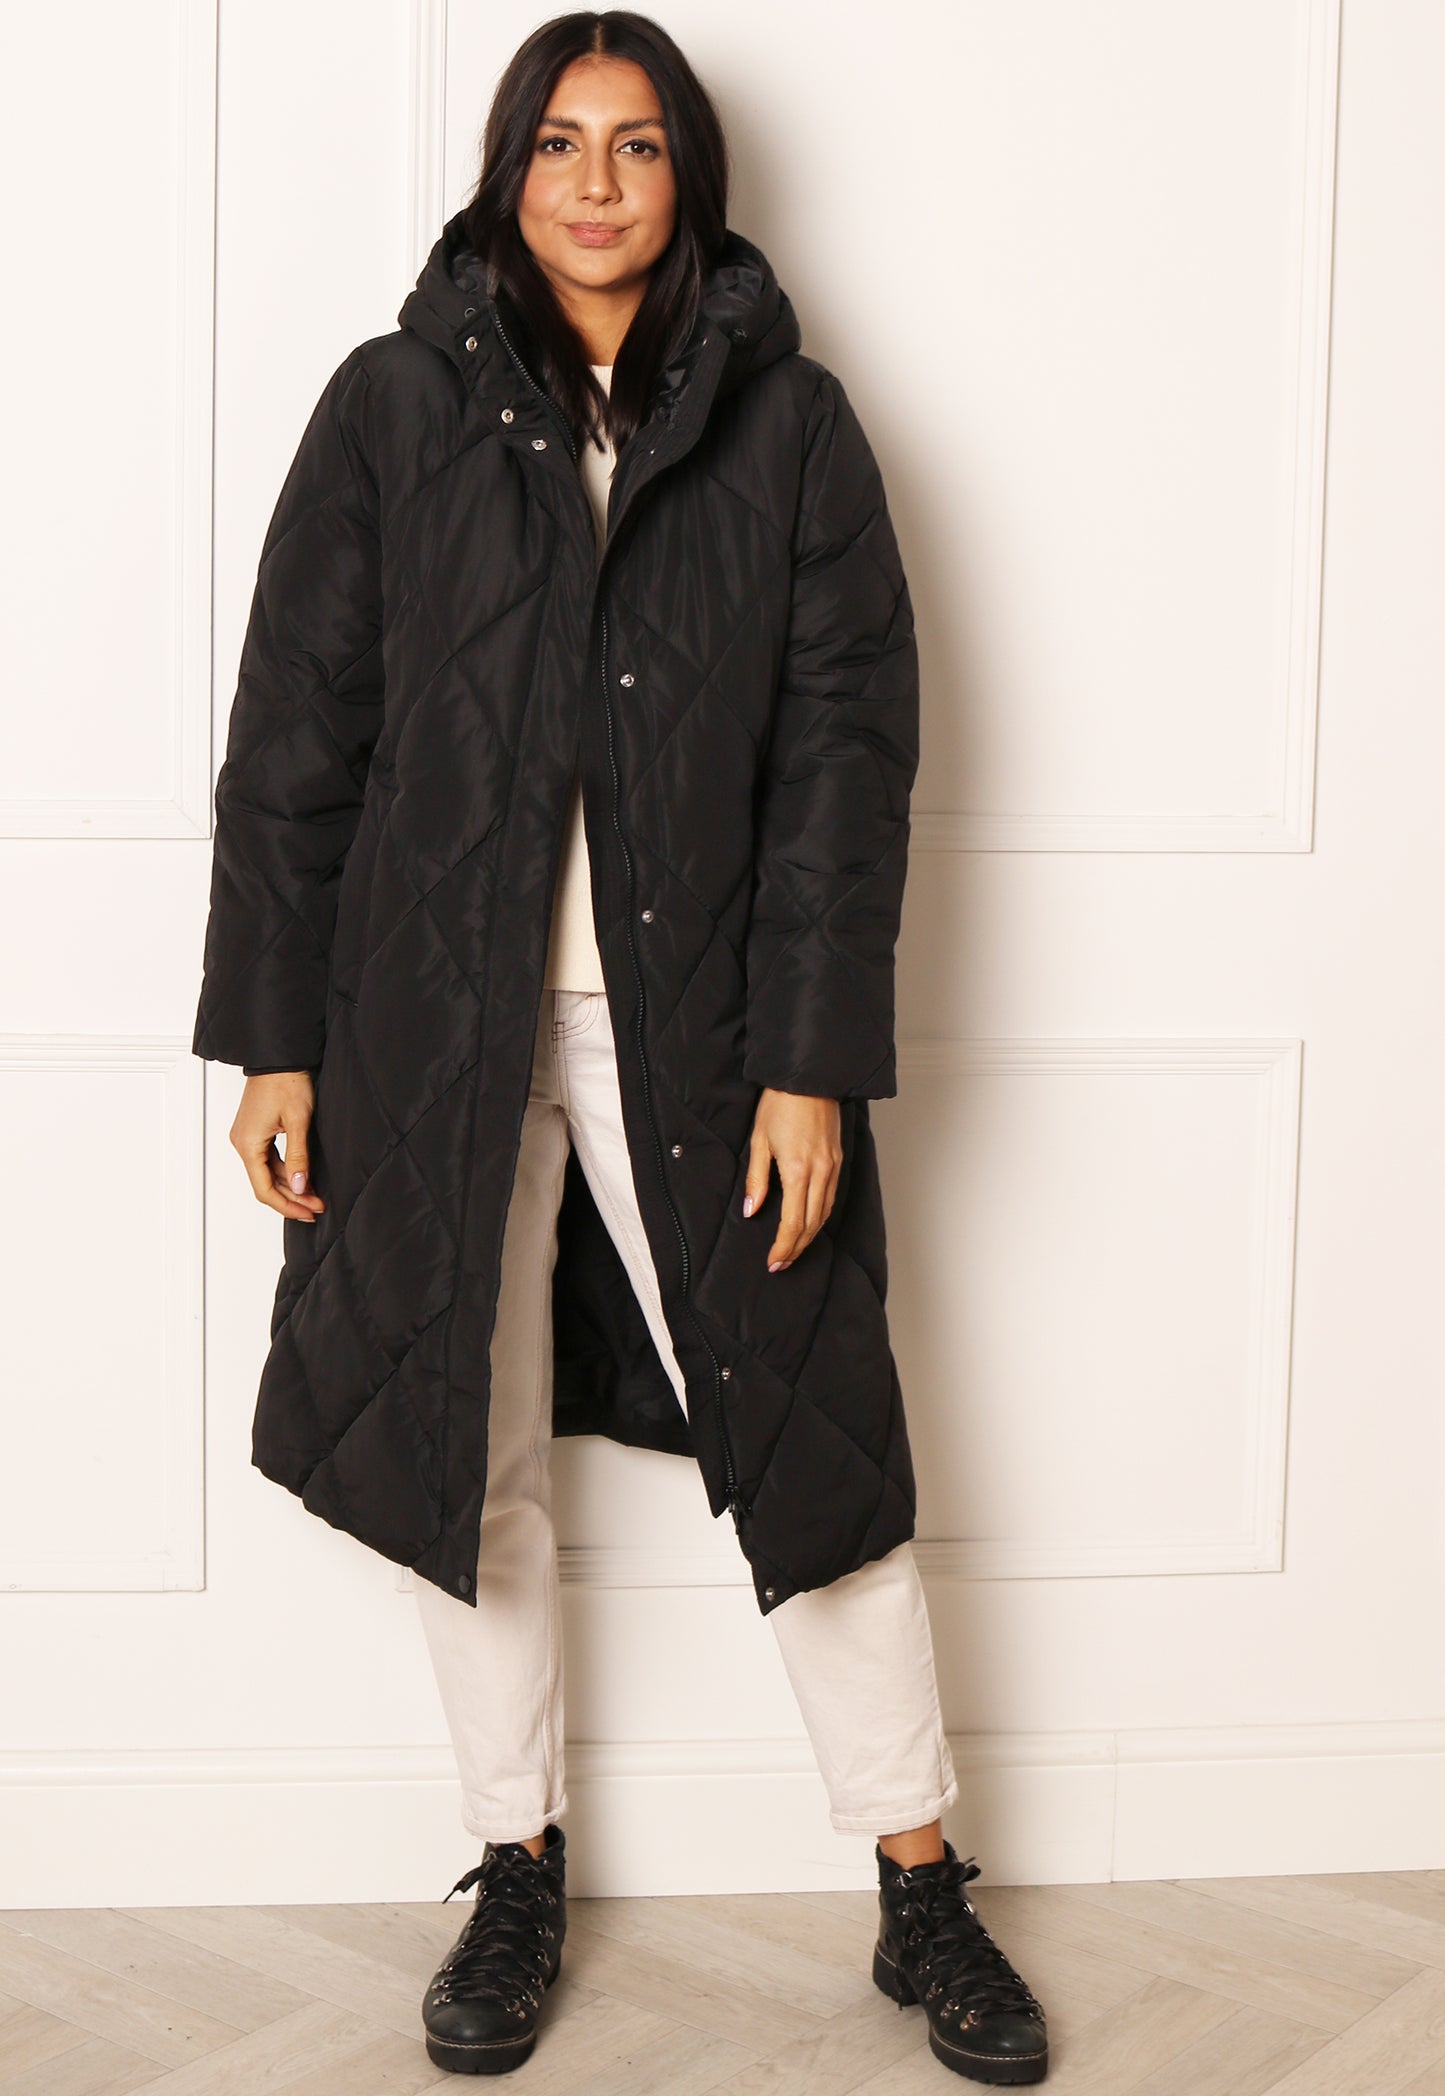 VERO MODA Laloa Diamond Quilted Midi Puffer Coat with Hood in Black - One Nation Clothing